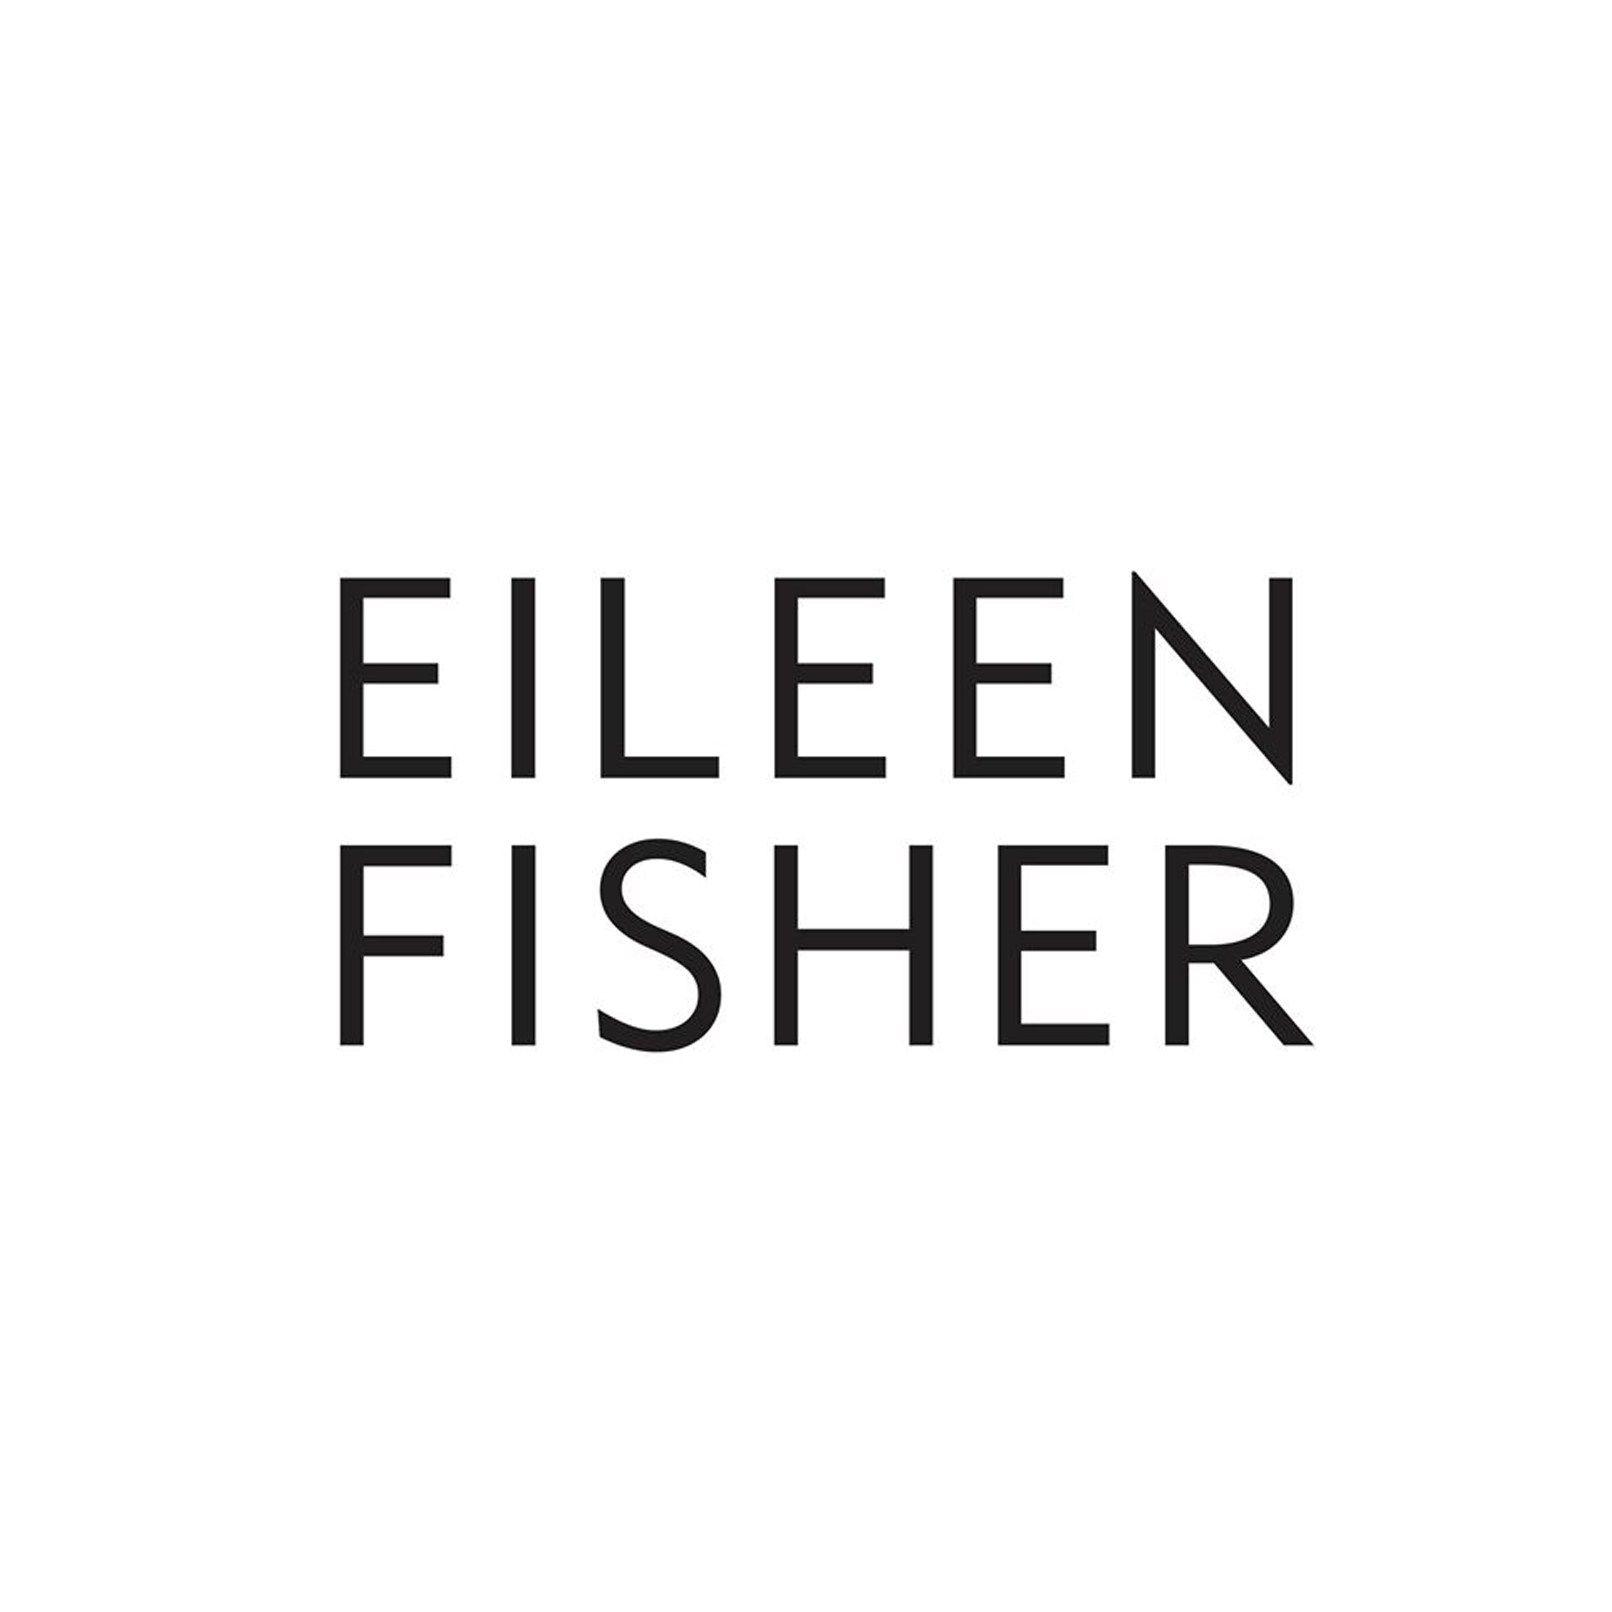 The Fisher Logo - EILEEN FISHER Logoé